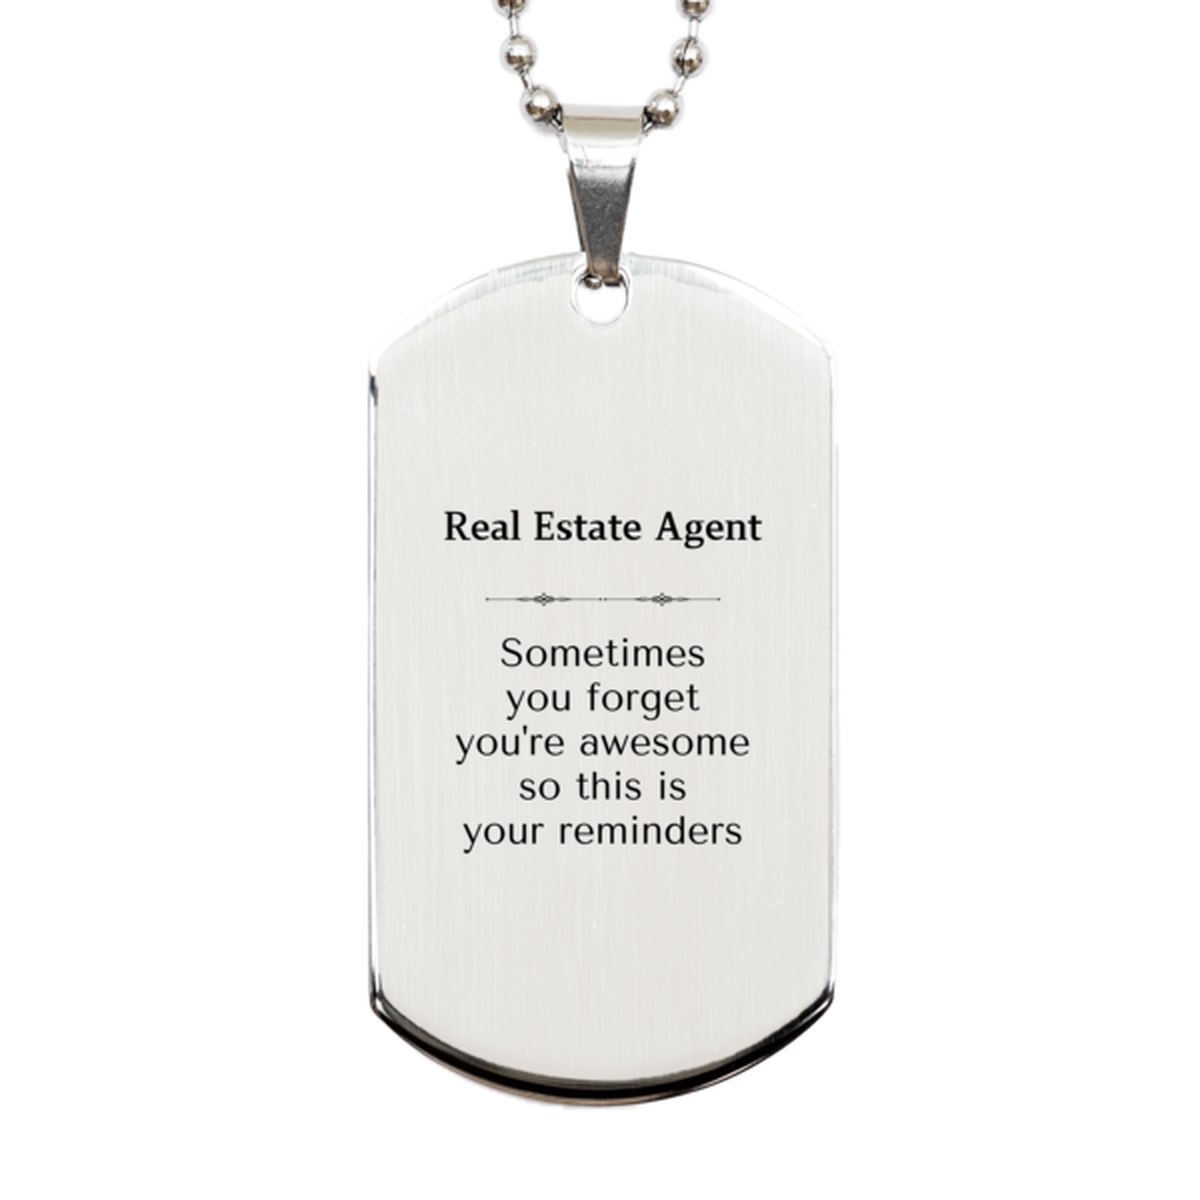 Sentimental Real Estate Agent Silver Dog Tag, Real Estate Agent Sometimes you forget you're awesome so this is your reminders, Graduation Christmas Birthday Gifts for Real Estate Agent, Men, Women, Coworkers